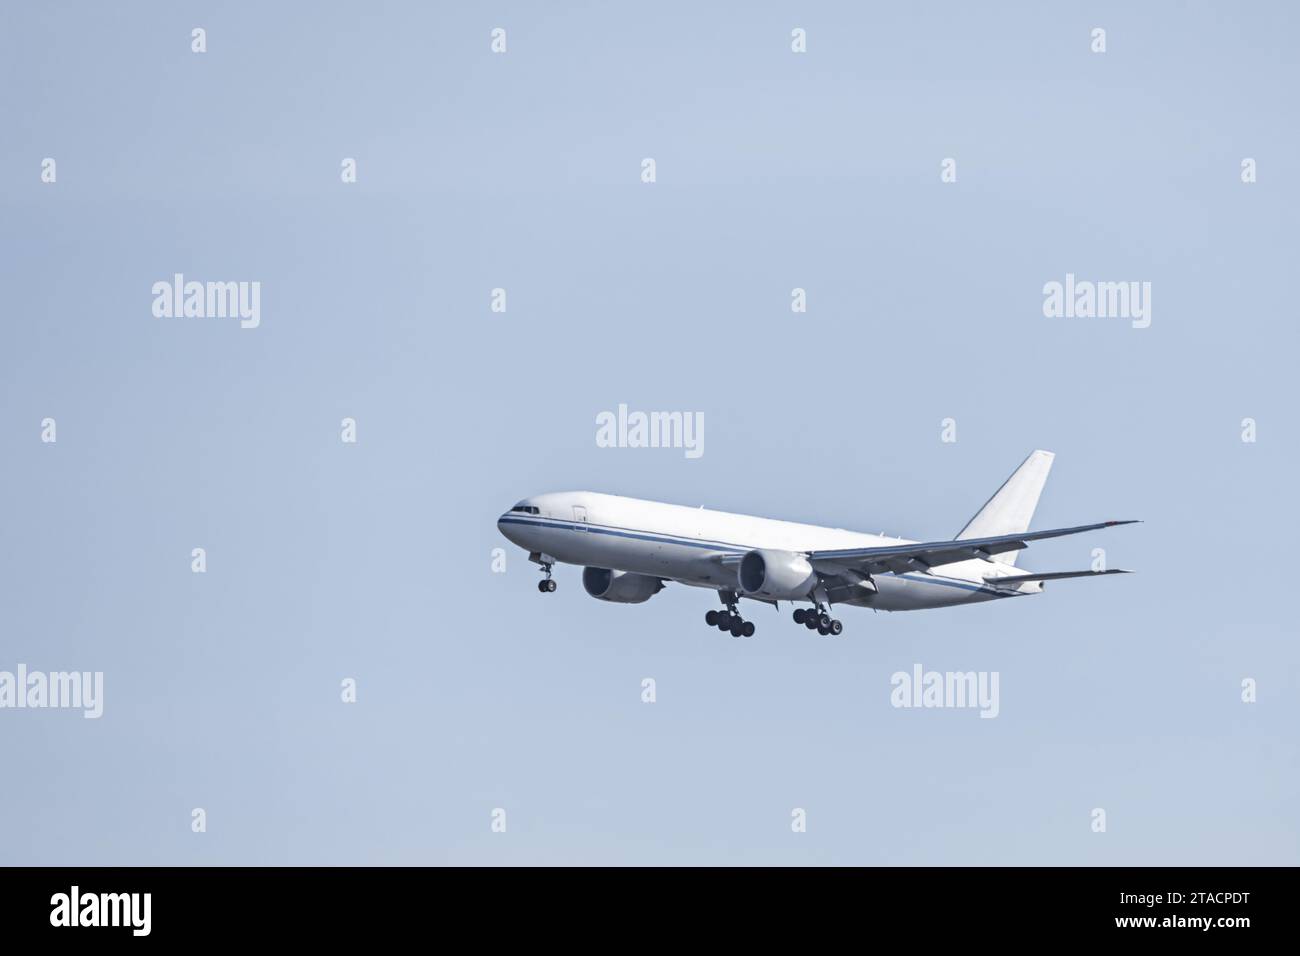 An airplane cargo jet descending altitude to land at an airport Stock Photo